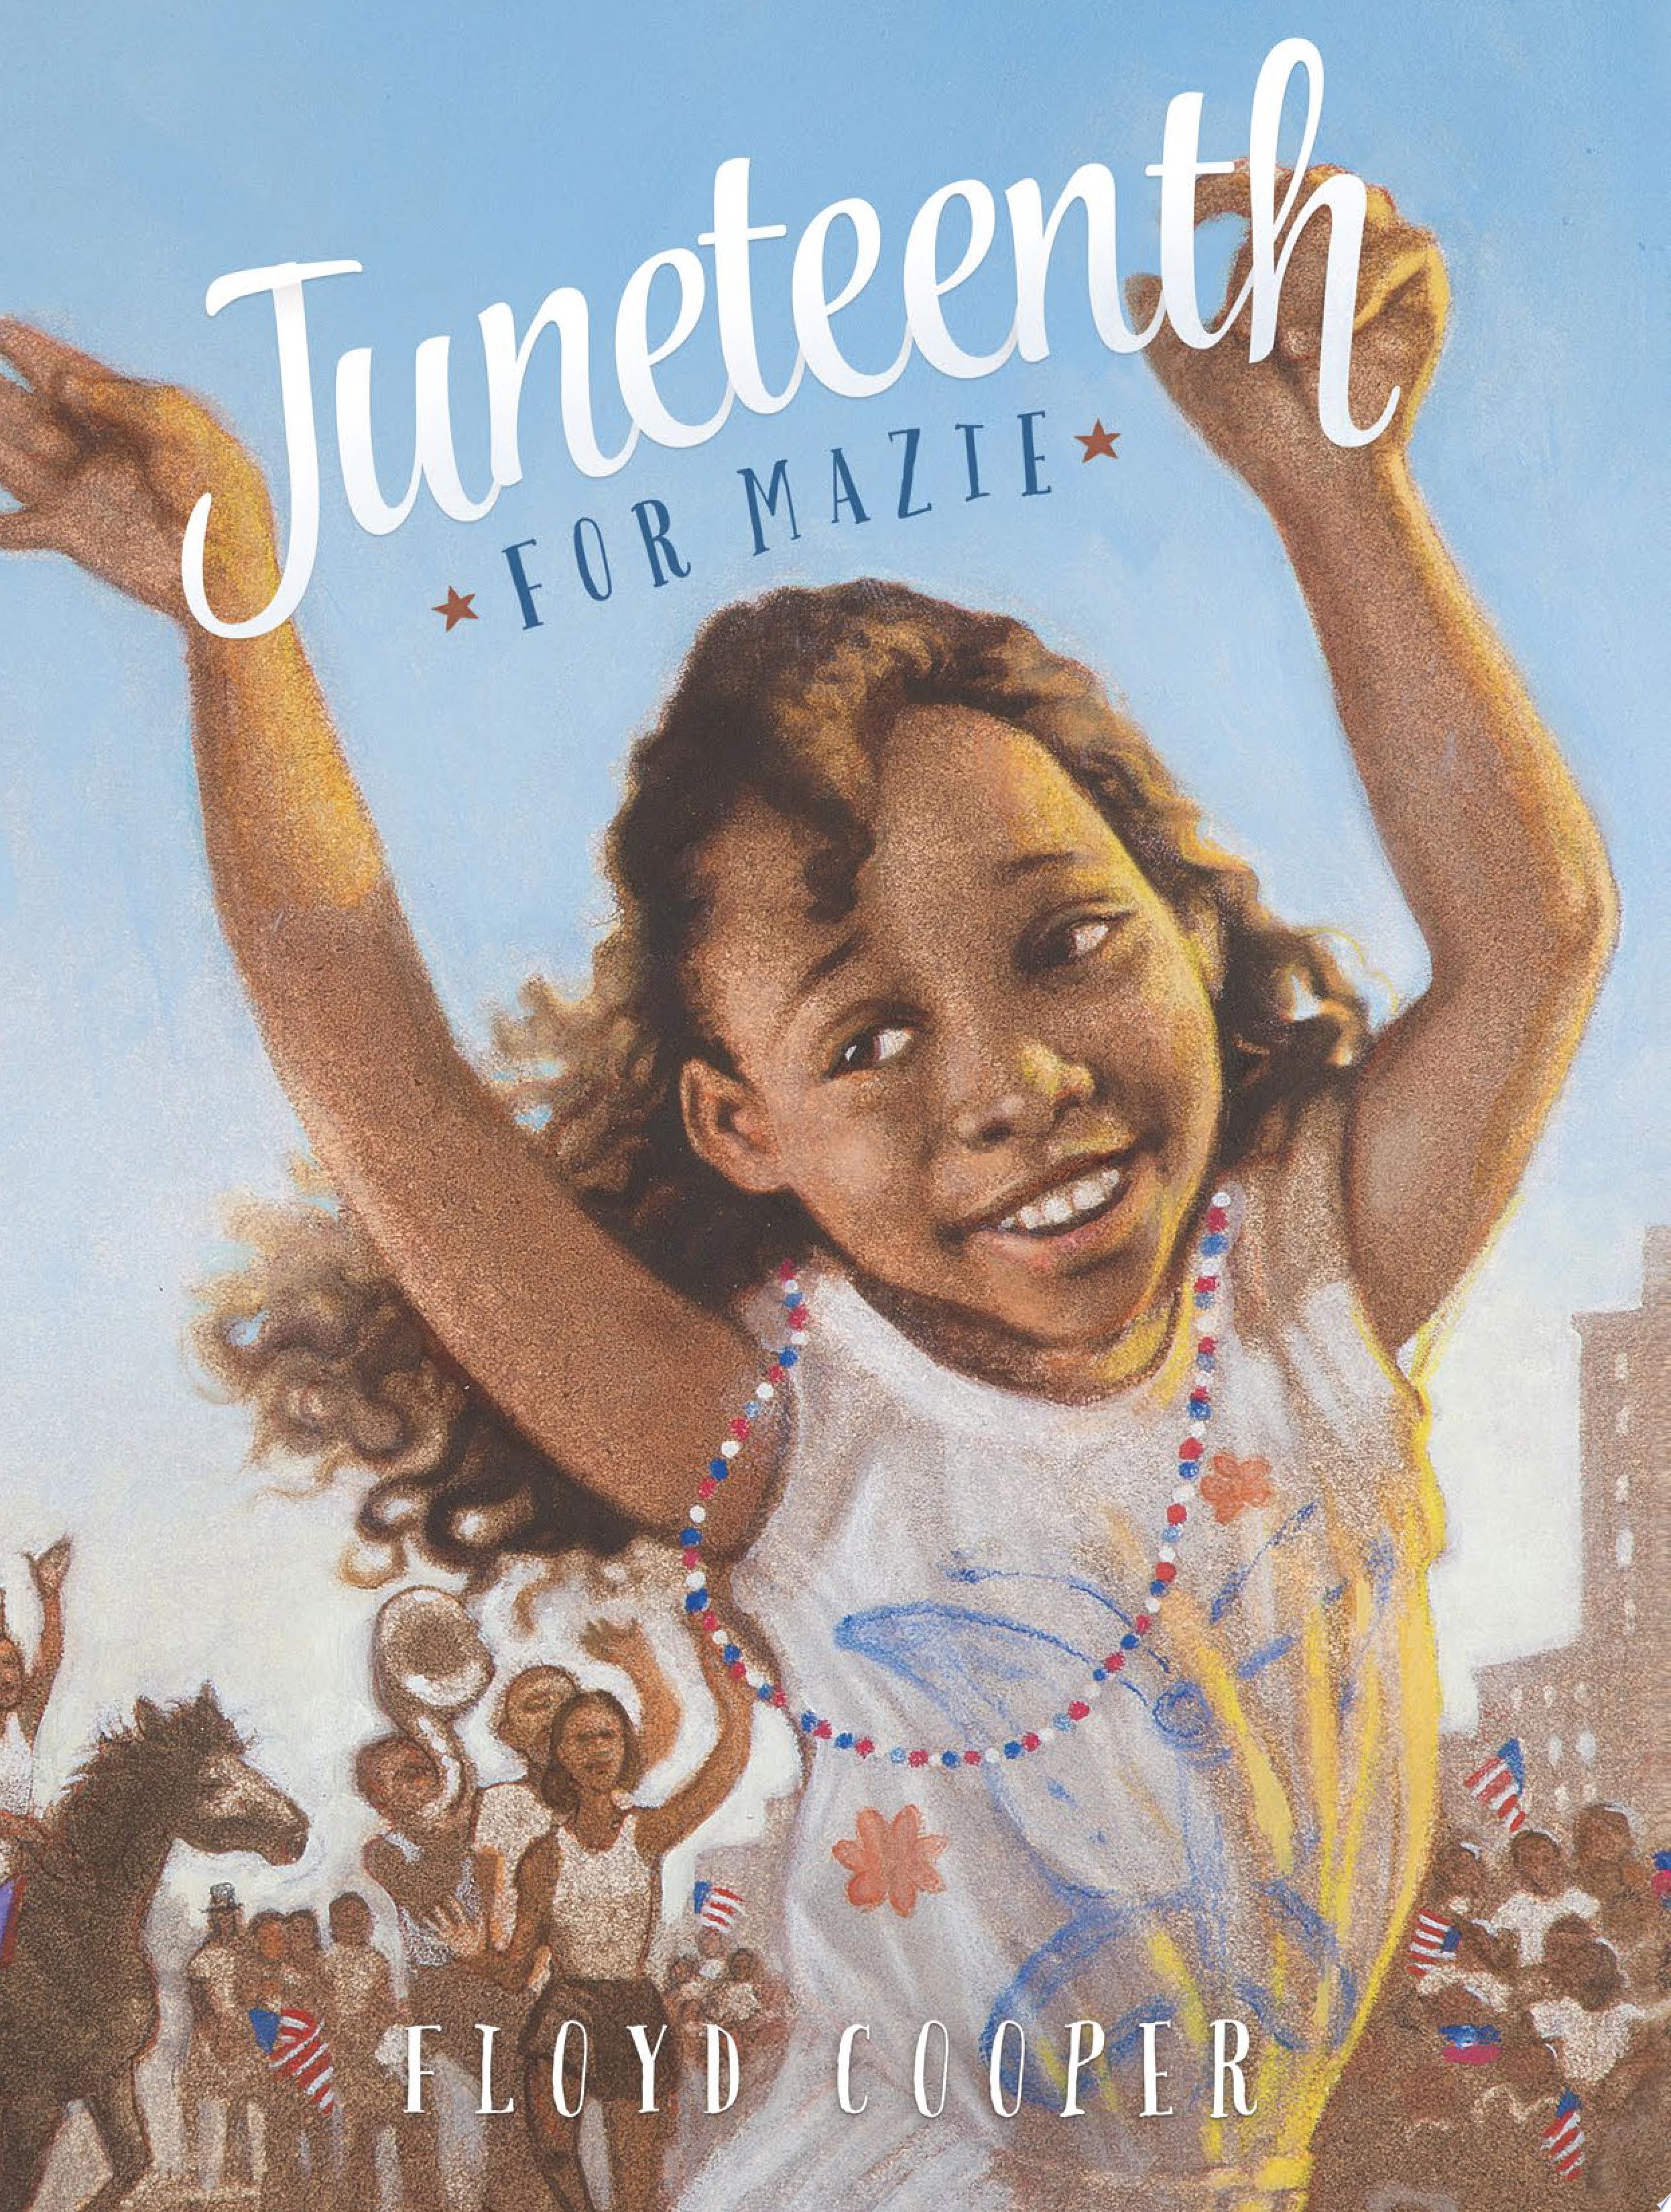 Image for "Juneteenth for Mazie"